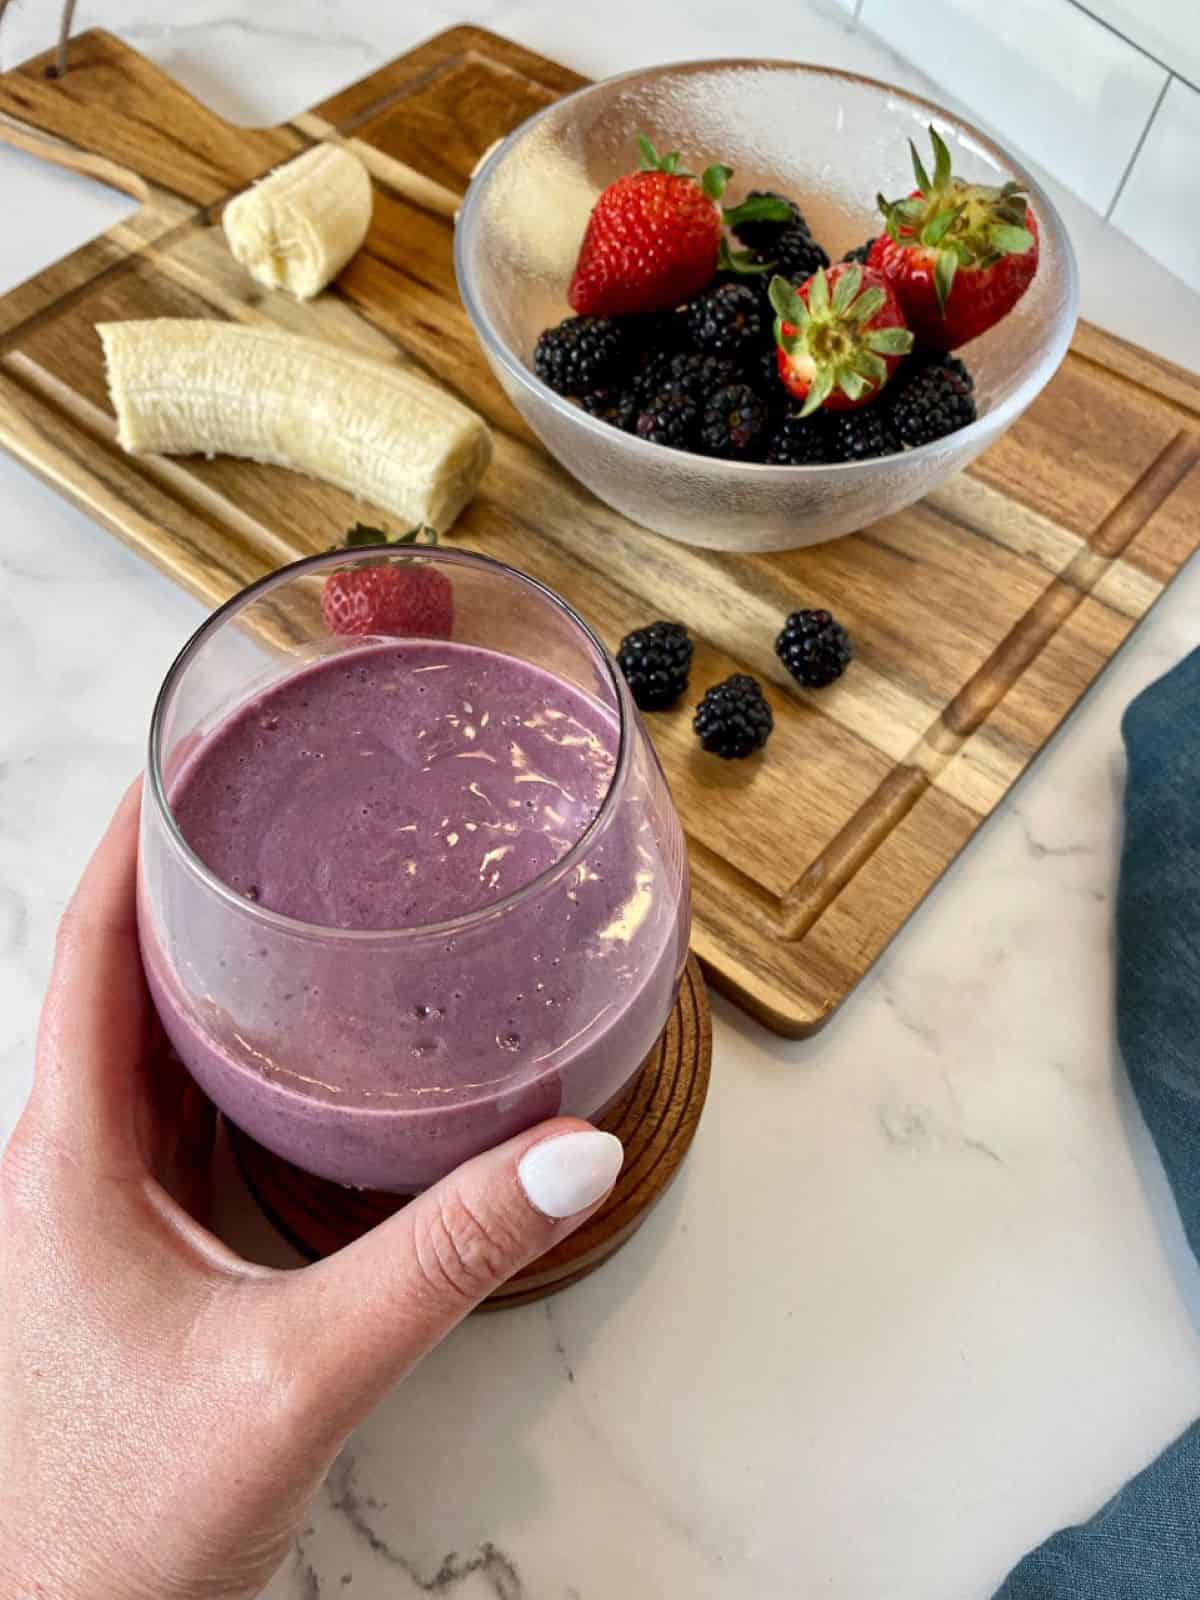 A hand grabbing a purple smoothie made with berries.